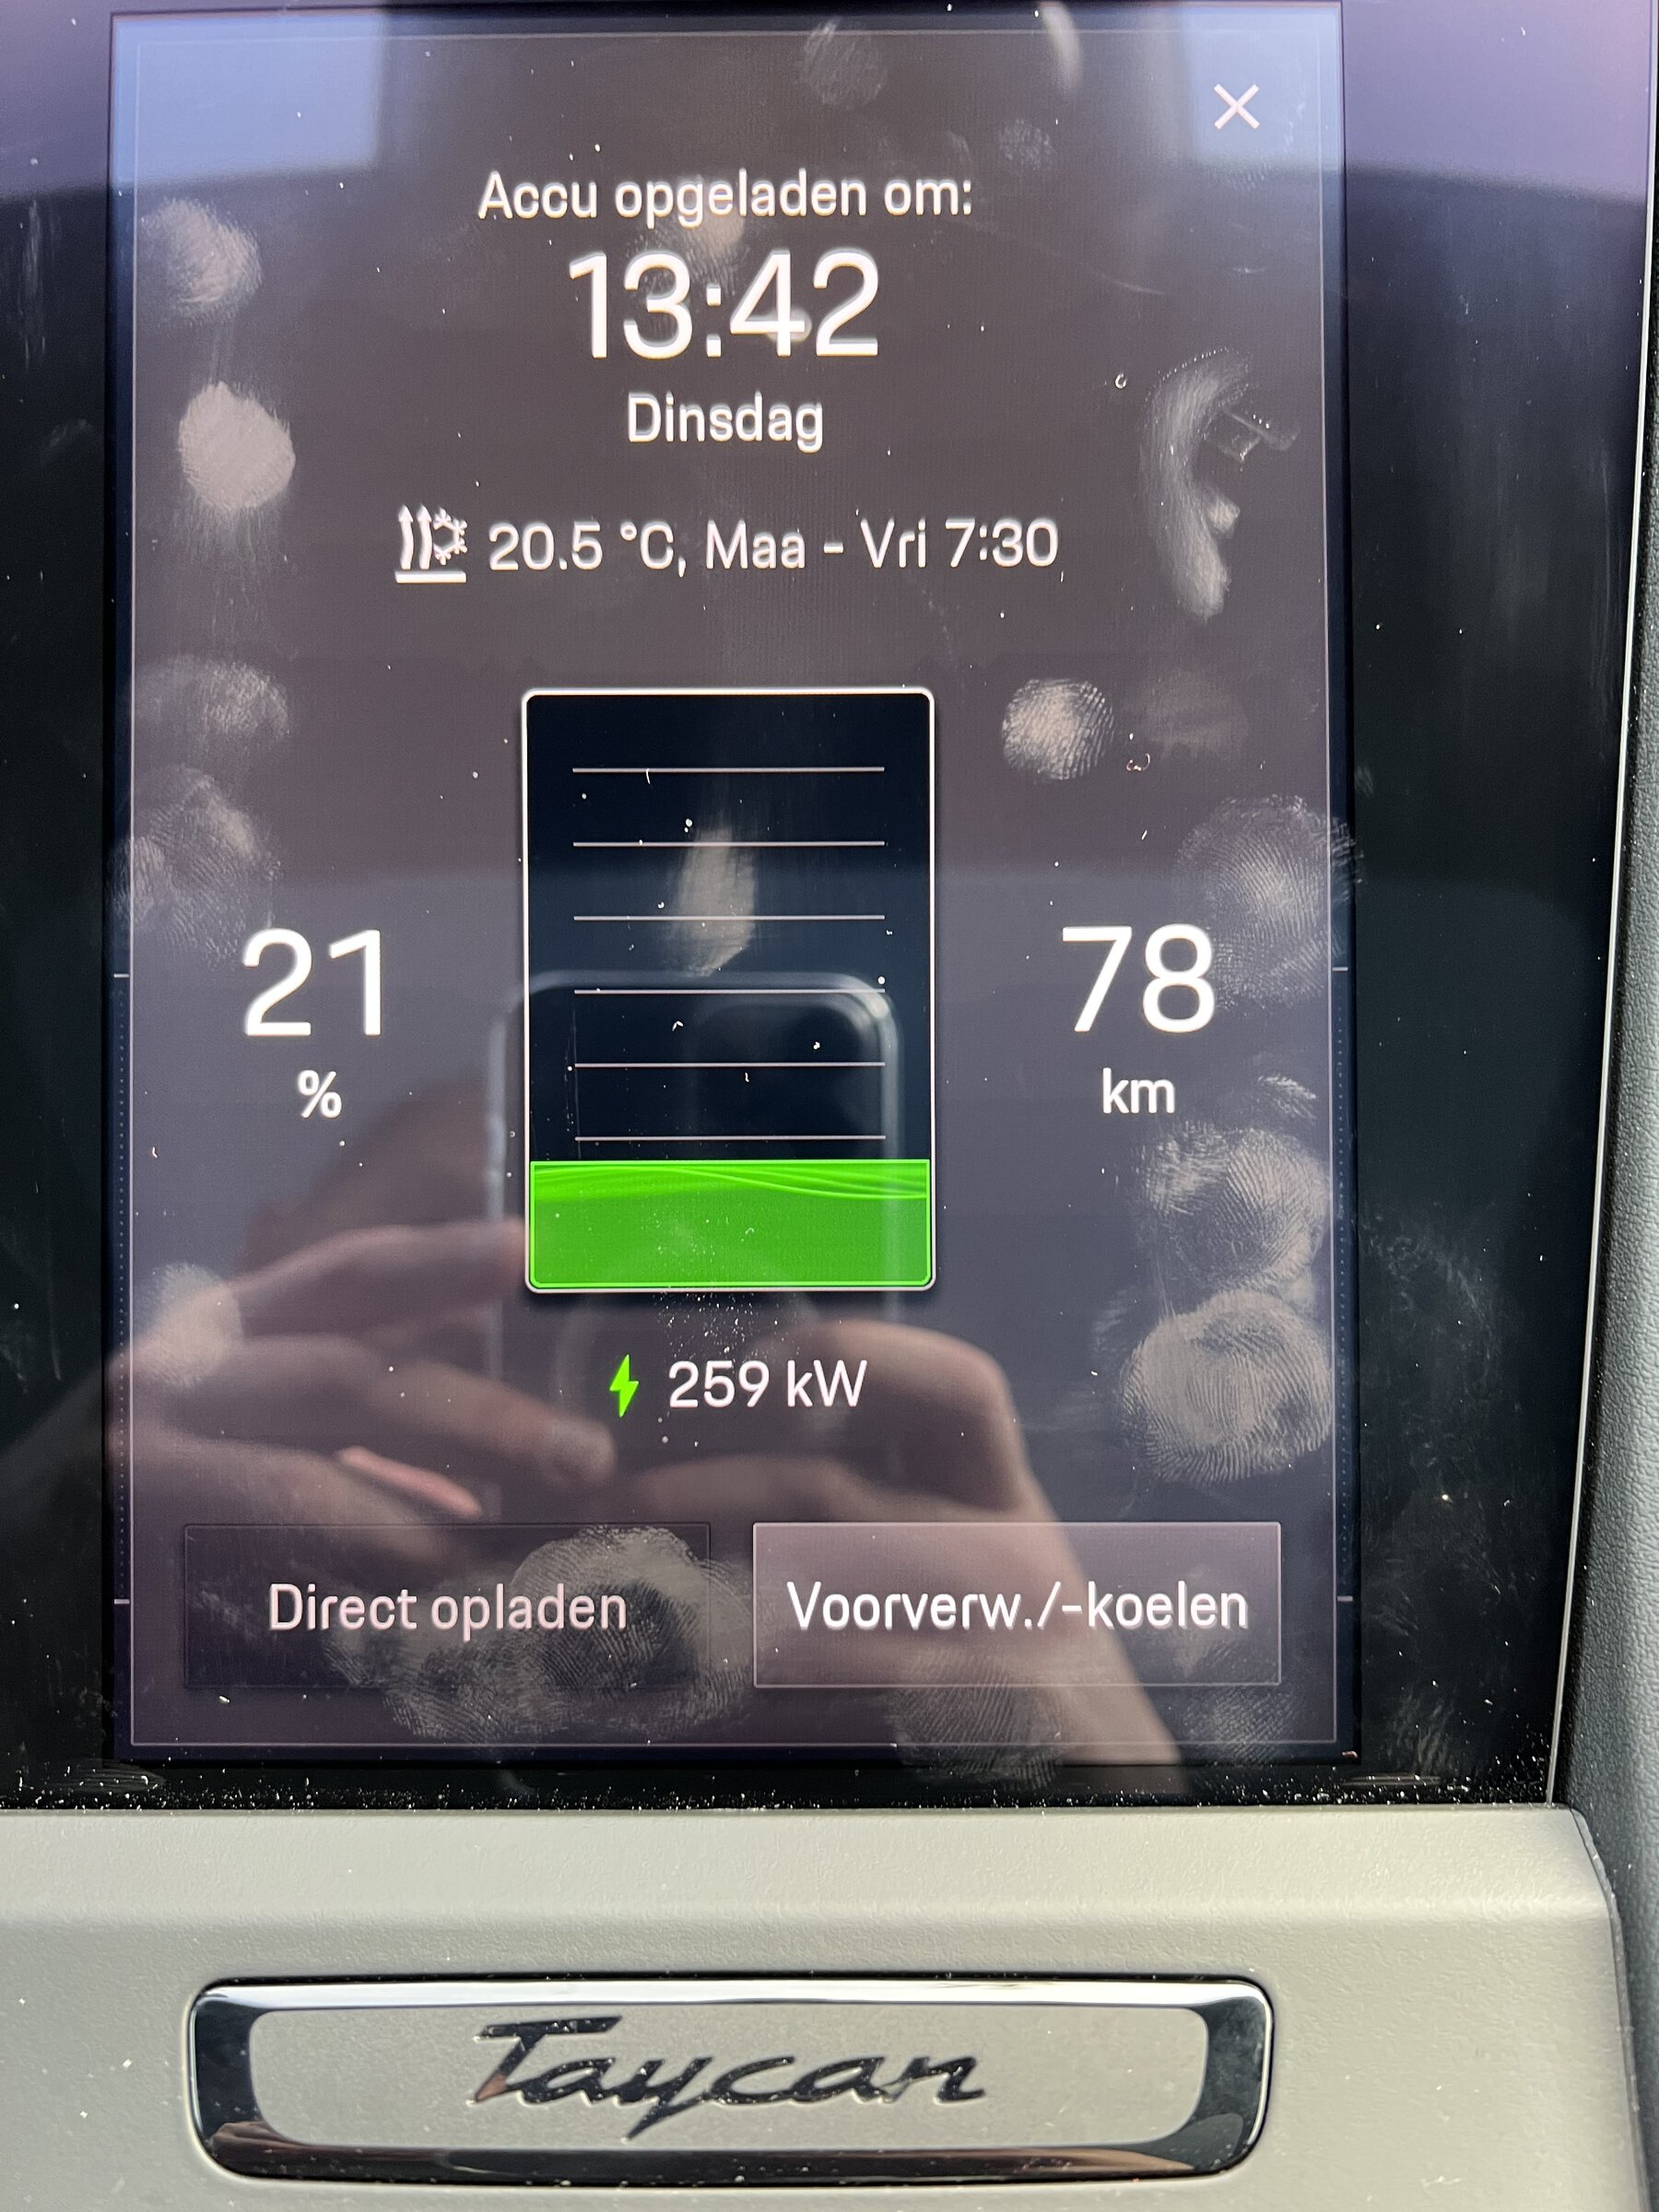 Porsche Taycan Confused by low DC charge at public charger A7543062-BDF2-46E3-A7F6-51CFCEE9761A